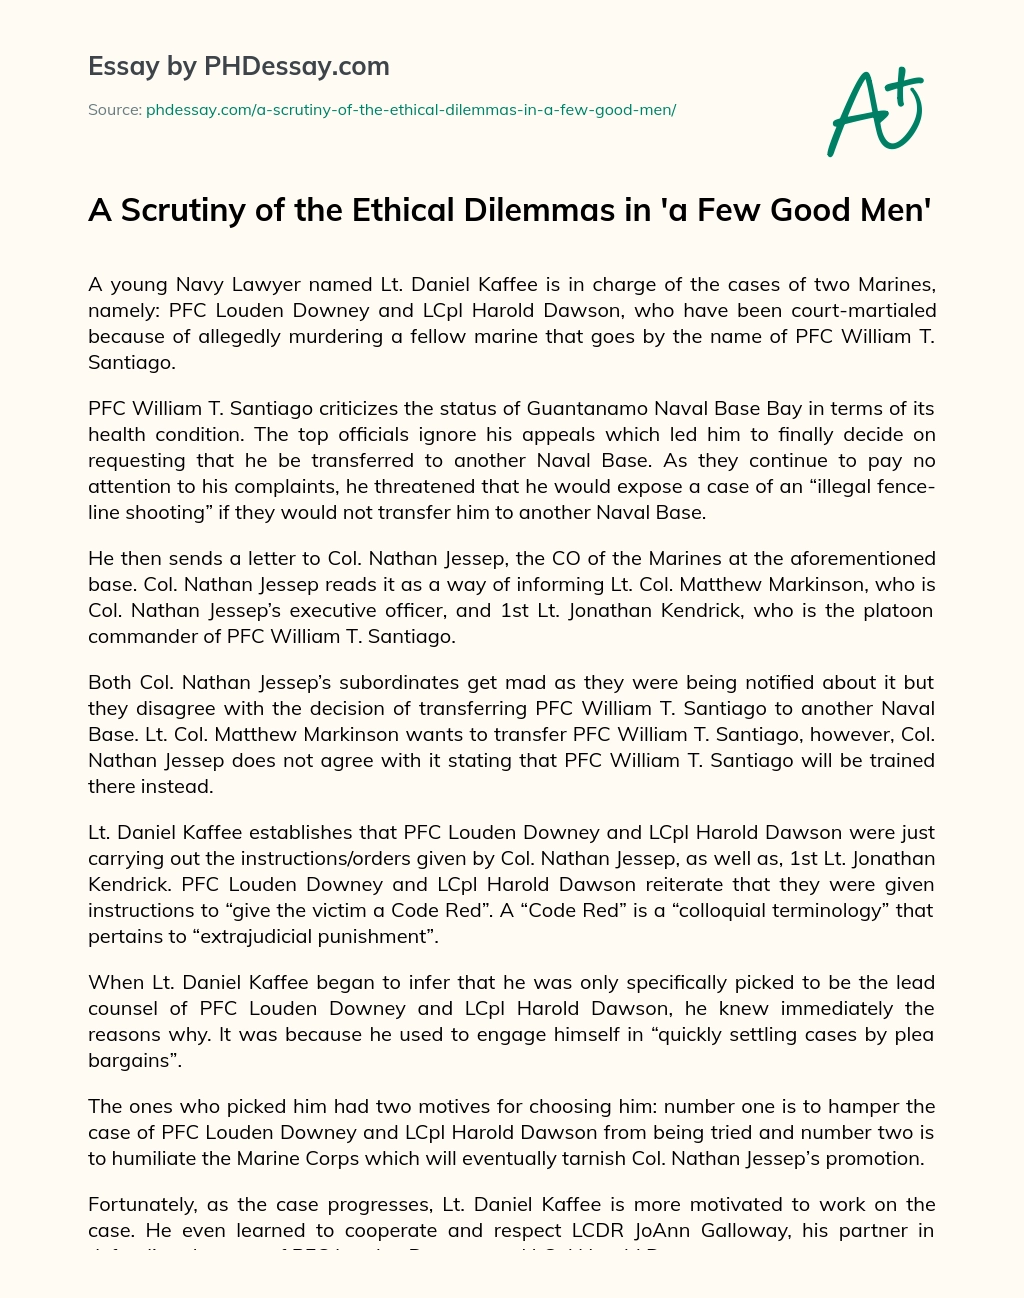 A Scrutiny of the Ethical Dilemmas in ‘a Few Good Men’ essay